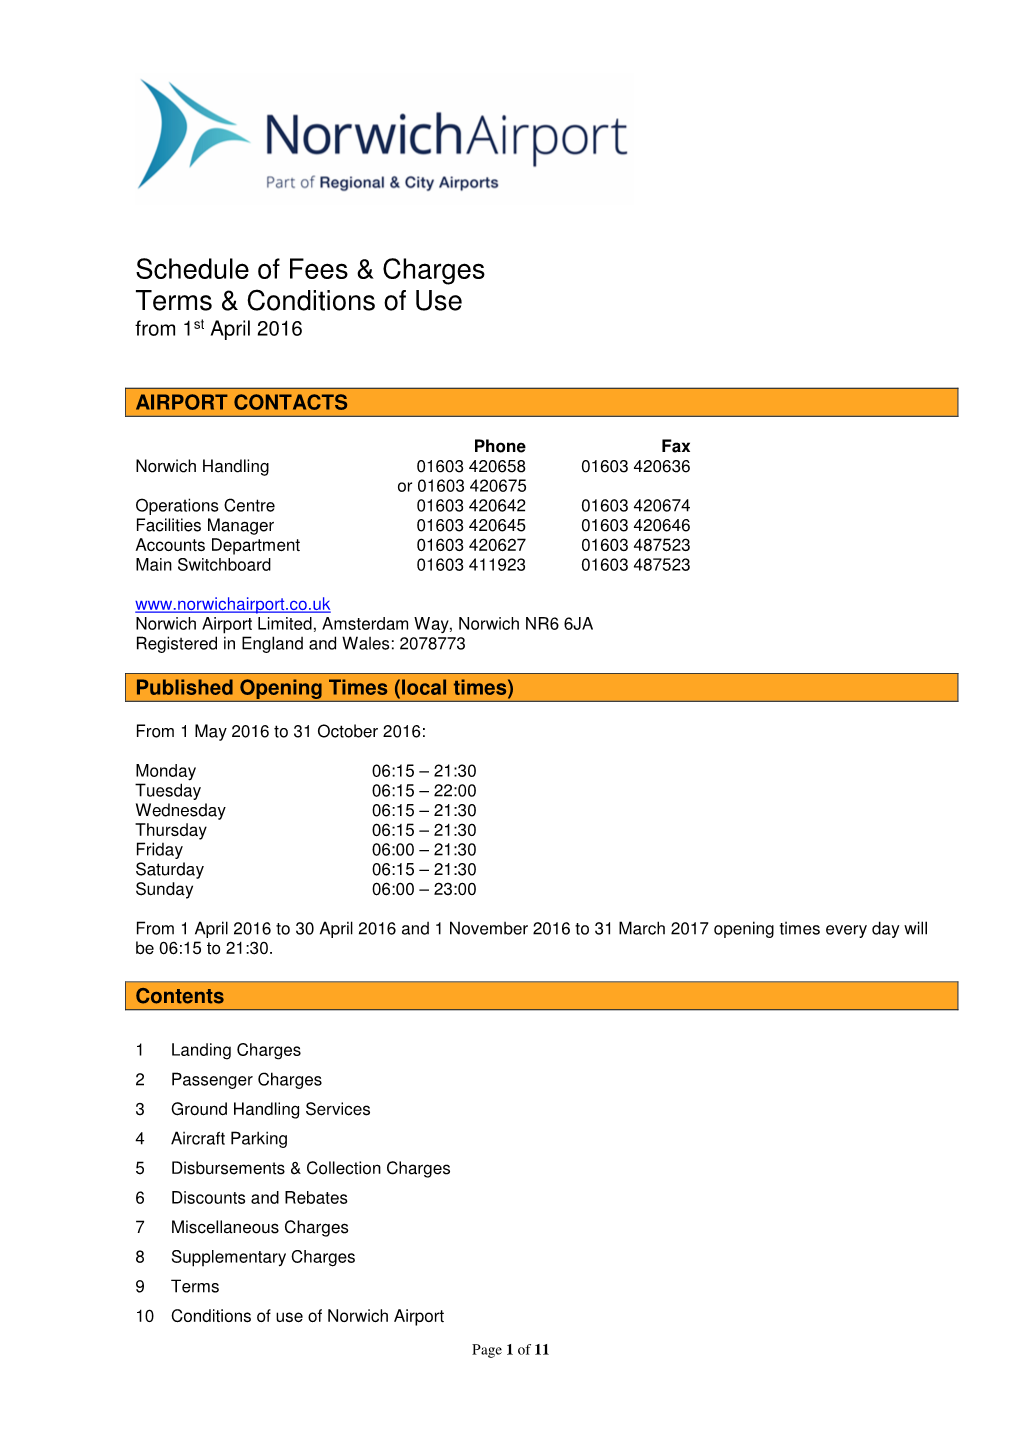 Schedule of Fees & Charges Terms & Conditions Of